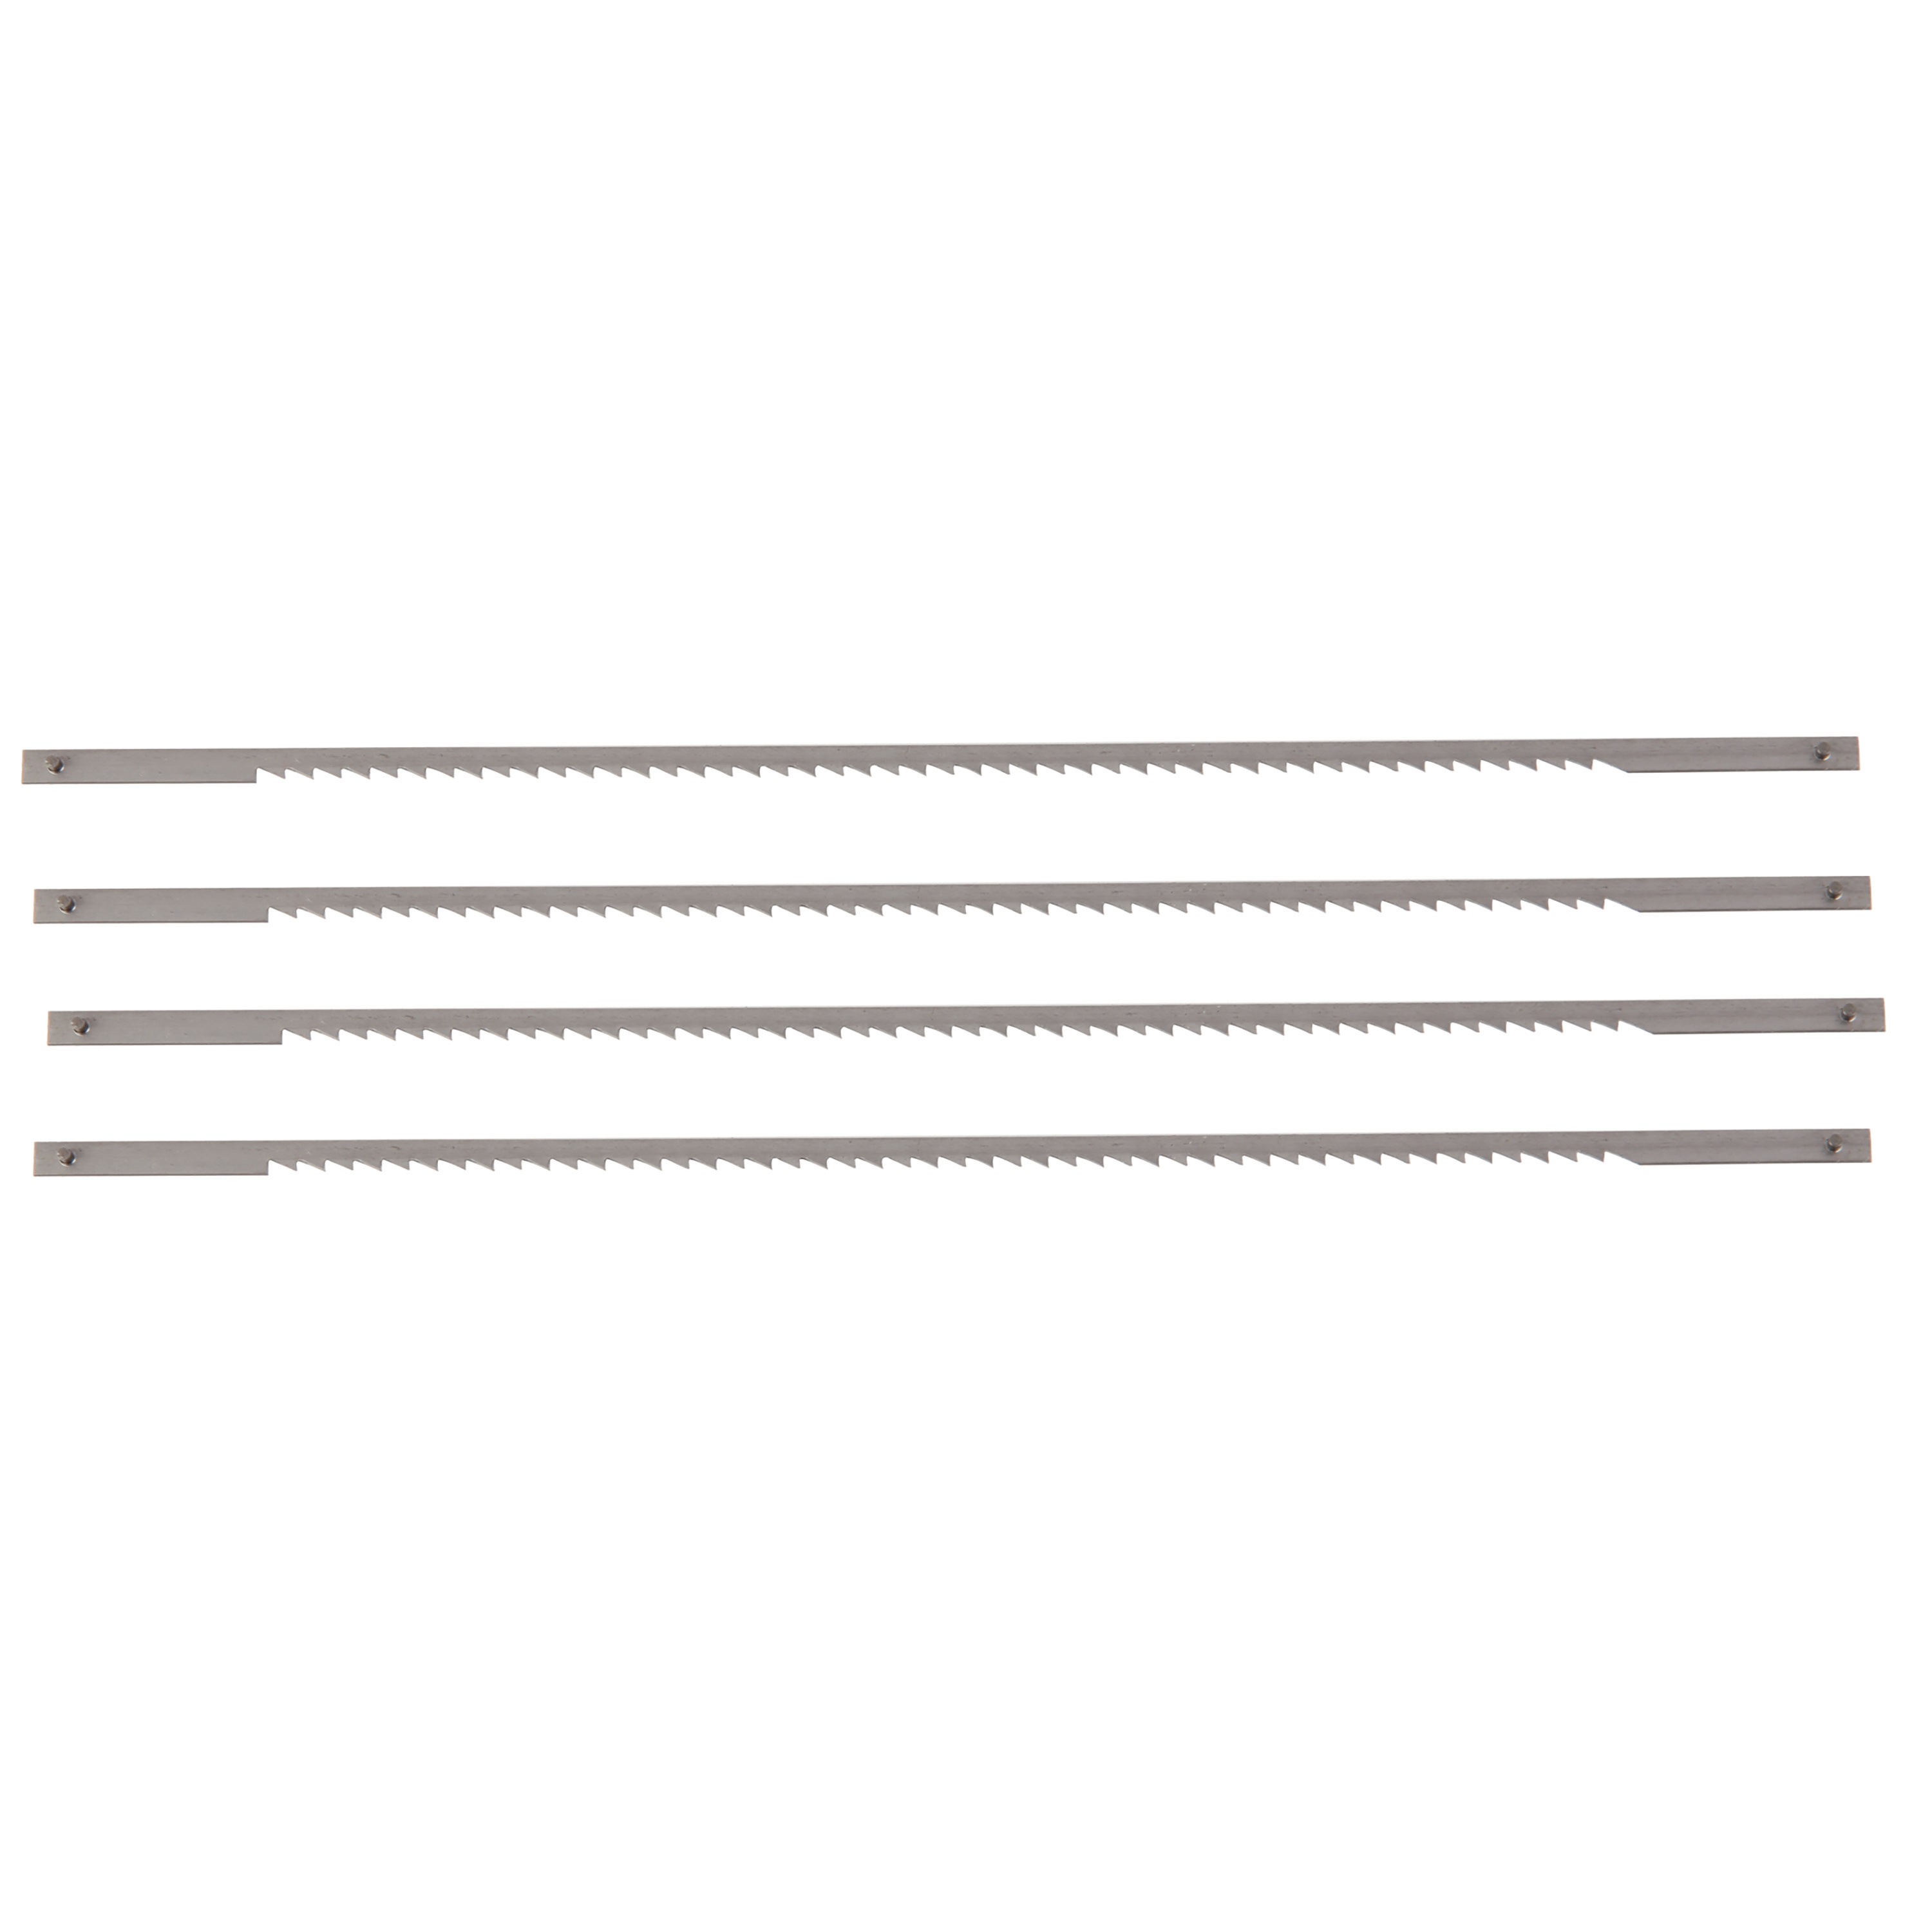 Stanley Tools - 4 pk 612 in x 10 TPI Coping Saw Blades - 15-058